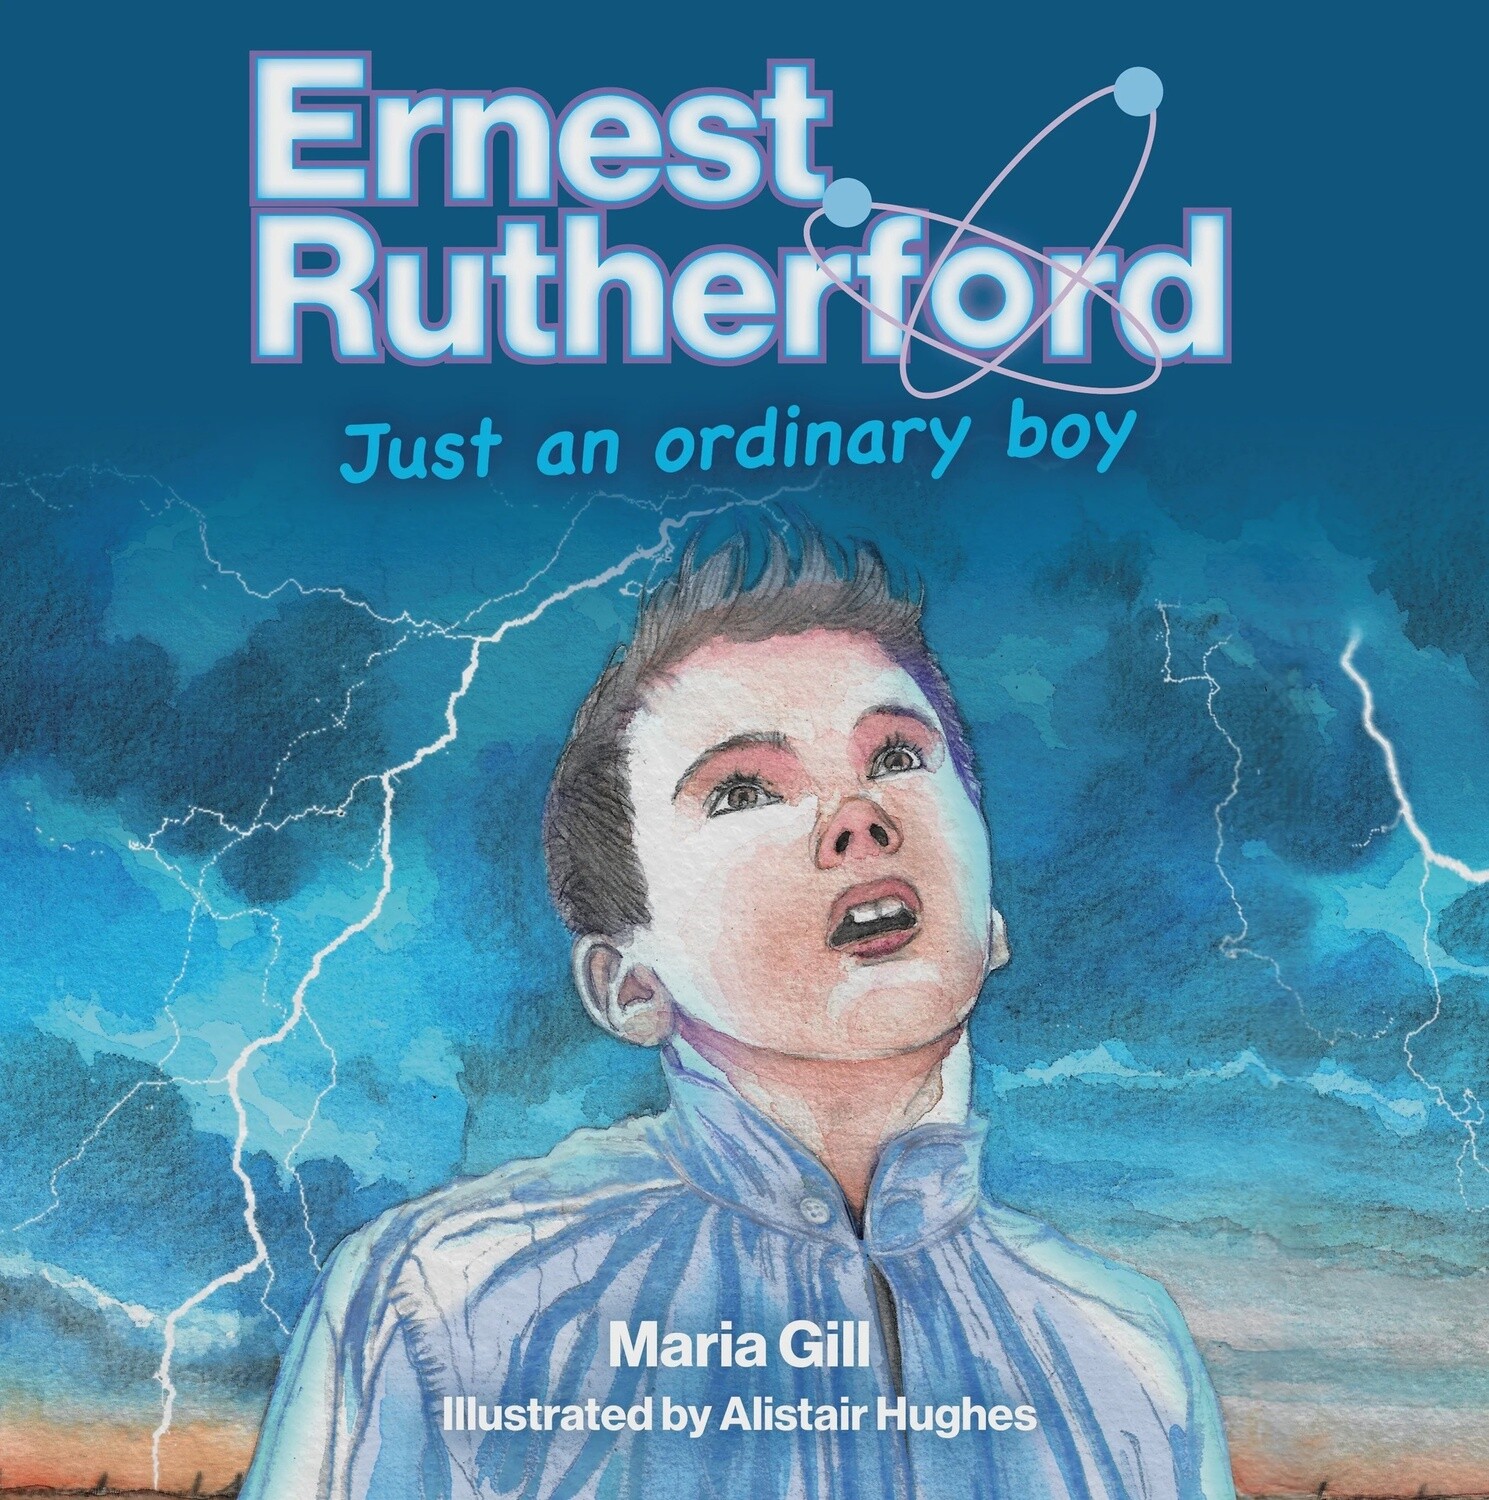 Ernest Rutherford: Just an ordinary boy by Maria Gill